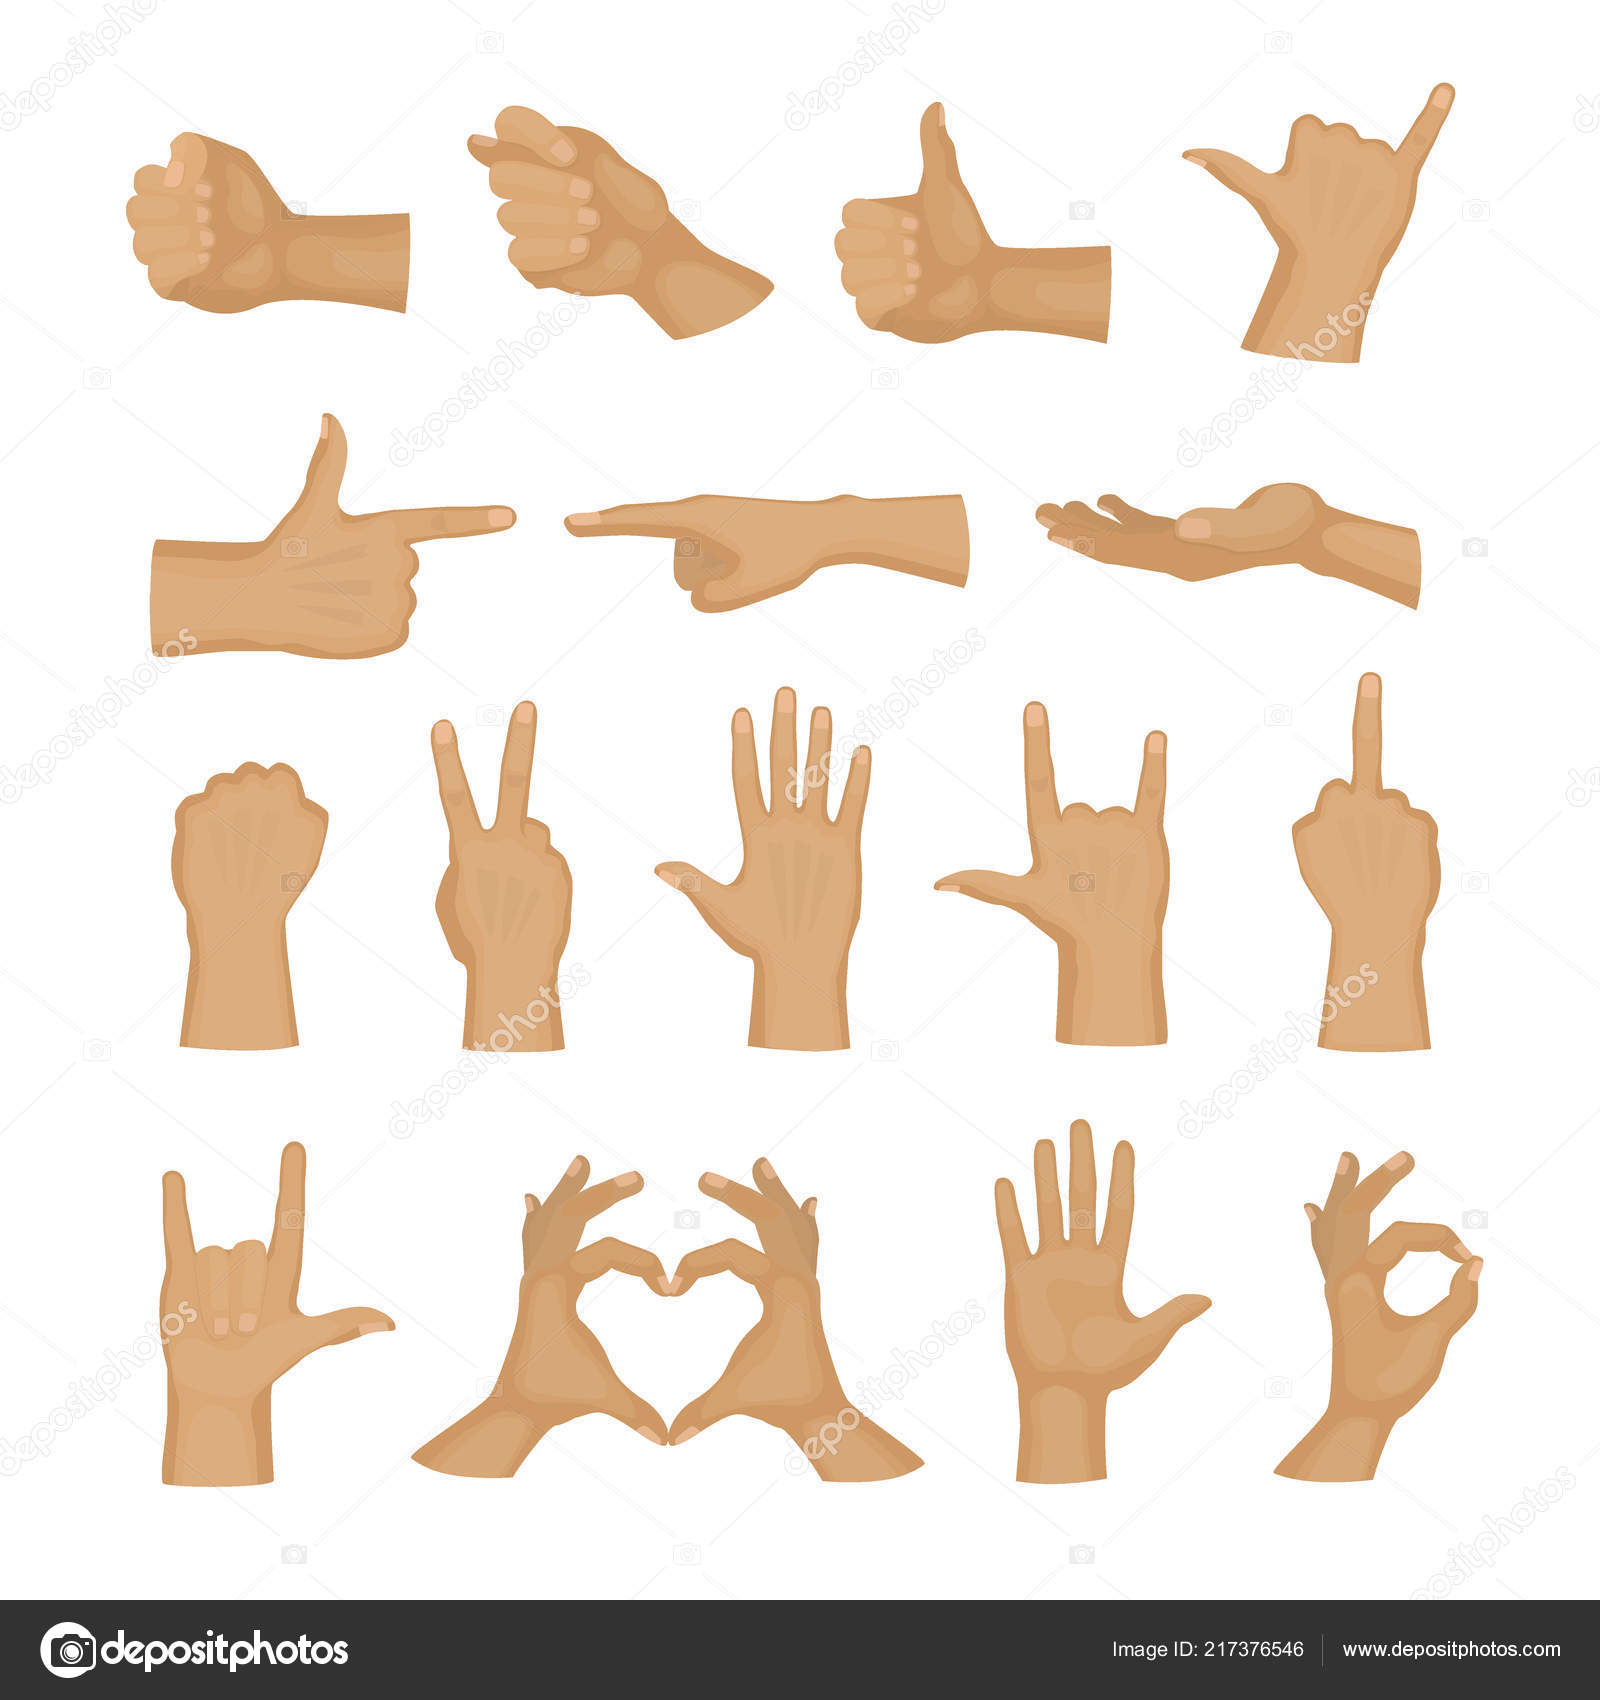 woman hands fingers gestures deaf mute signals human arm handle hold communication finger gestures direction fist touch vector illustration stock vector image by c vectorshow 217376546